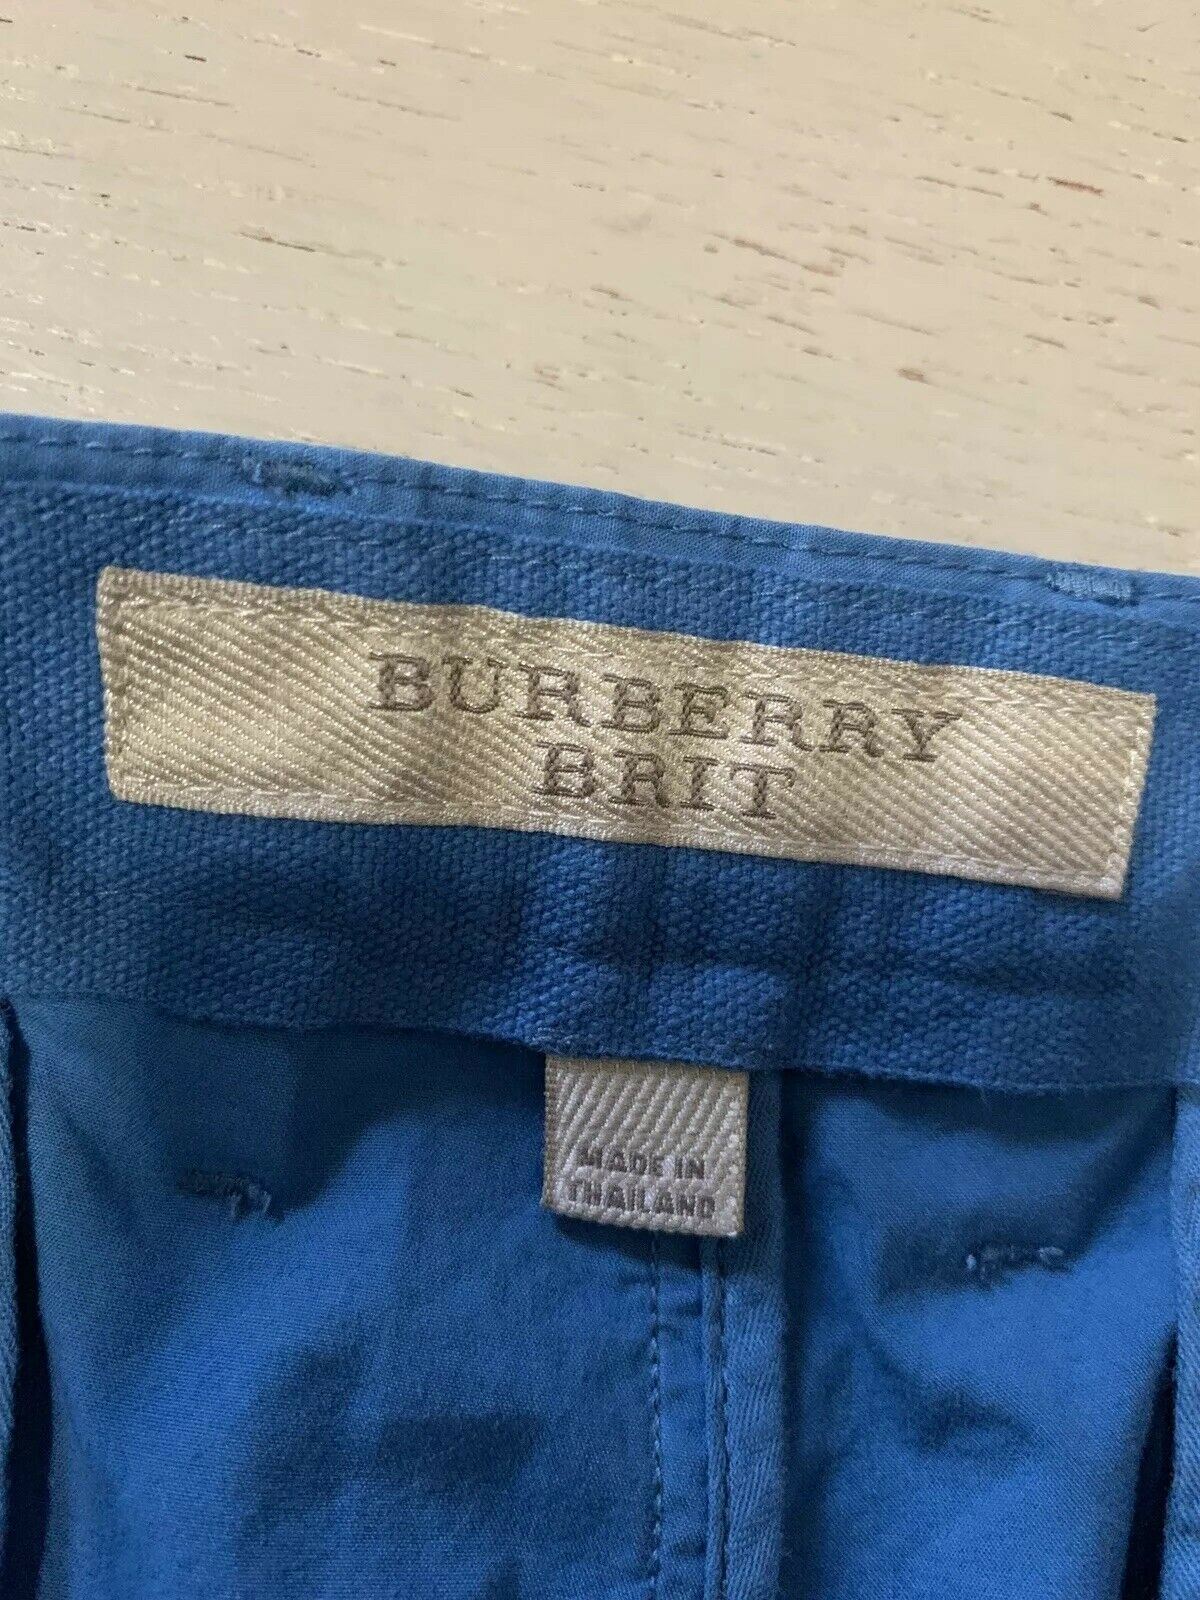 New $195 Burberry Brit Short Pants Lupin Blue Size 42